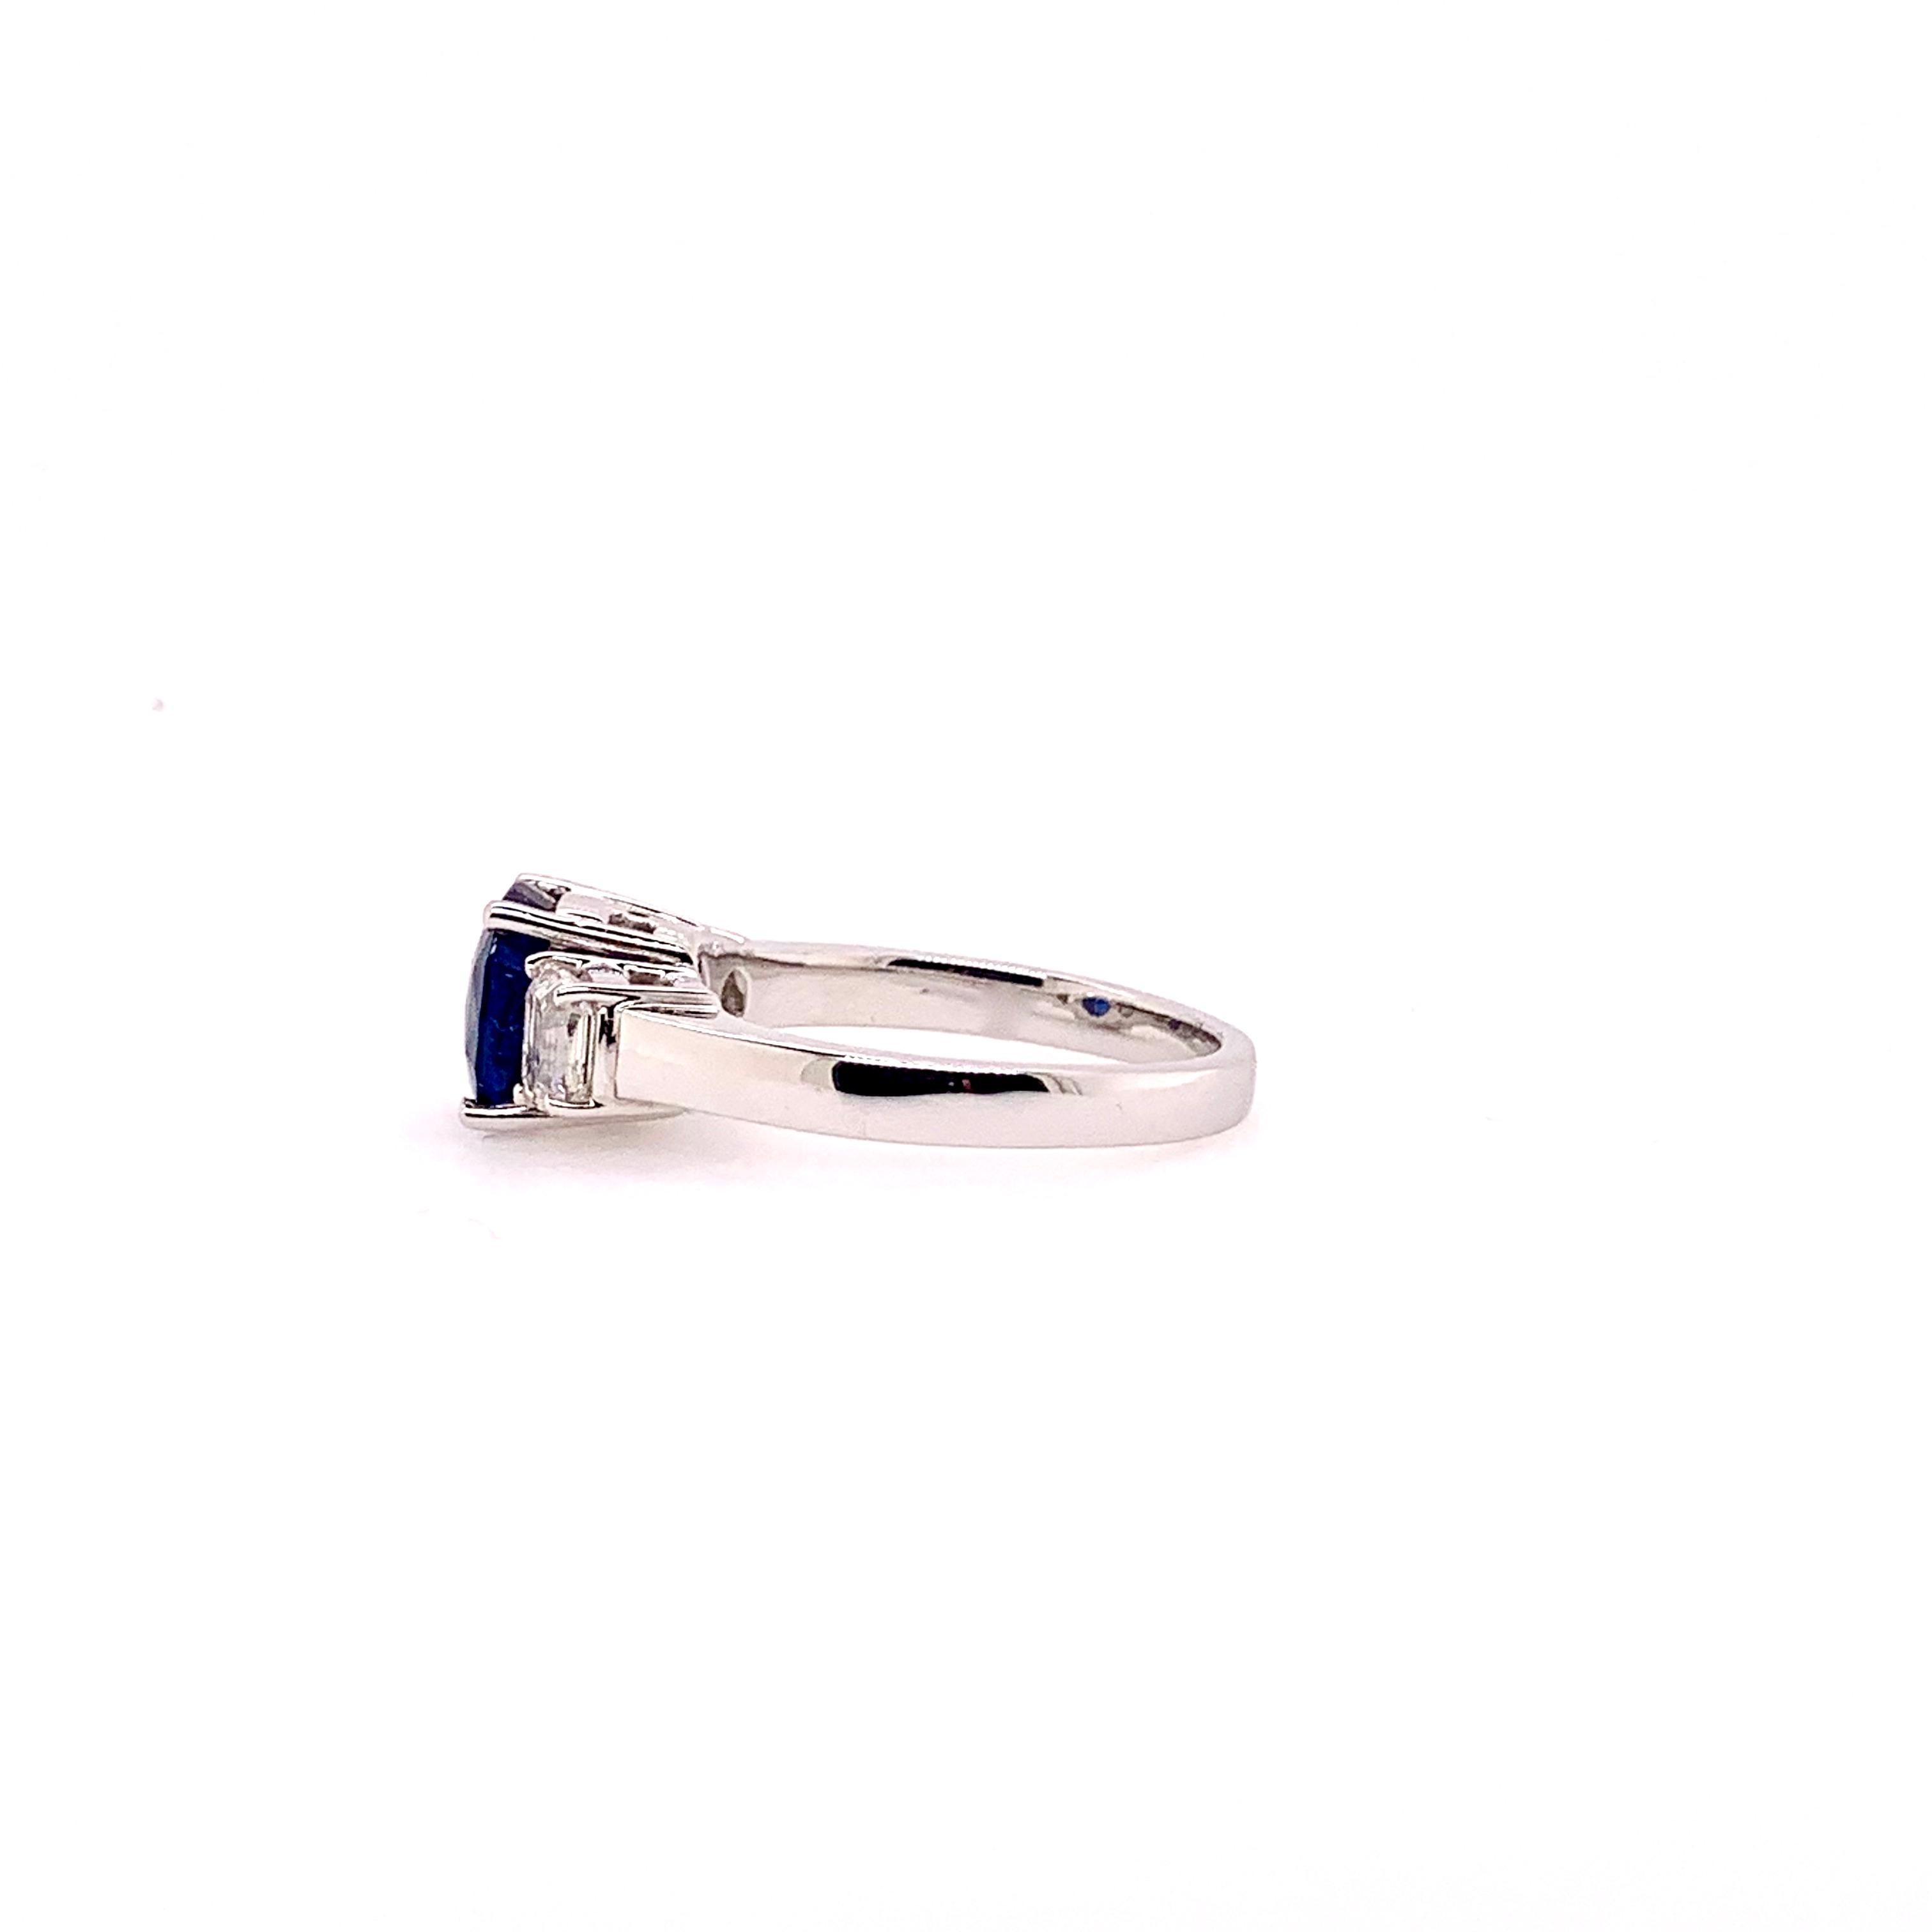 A gorgeous 3 stone sapphire and diamond ring in 18k white gold.  The ultimate classic that belongs in every family collection.  The GIA certified, heated blue sapphire is 2.39 cts and has 0.76 cts total weight of half moon cut diamonds. 

Ring Size